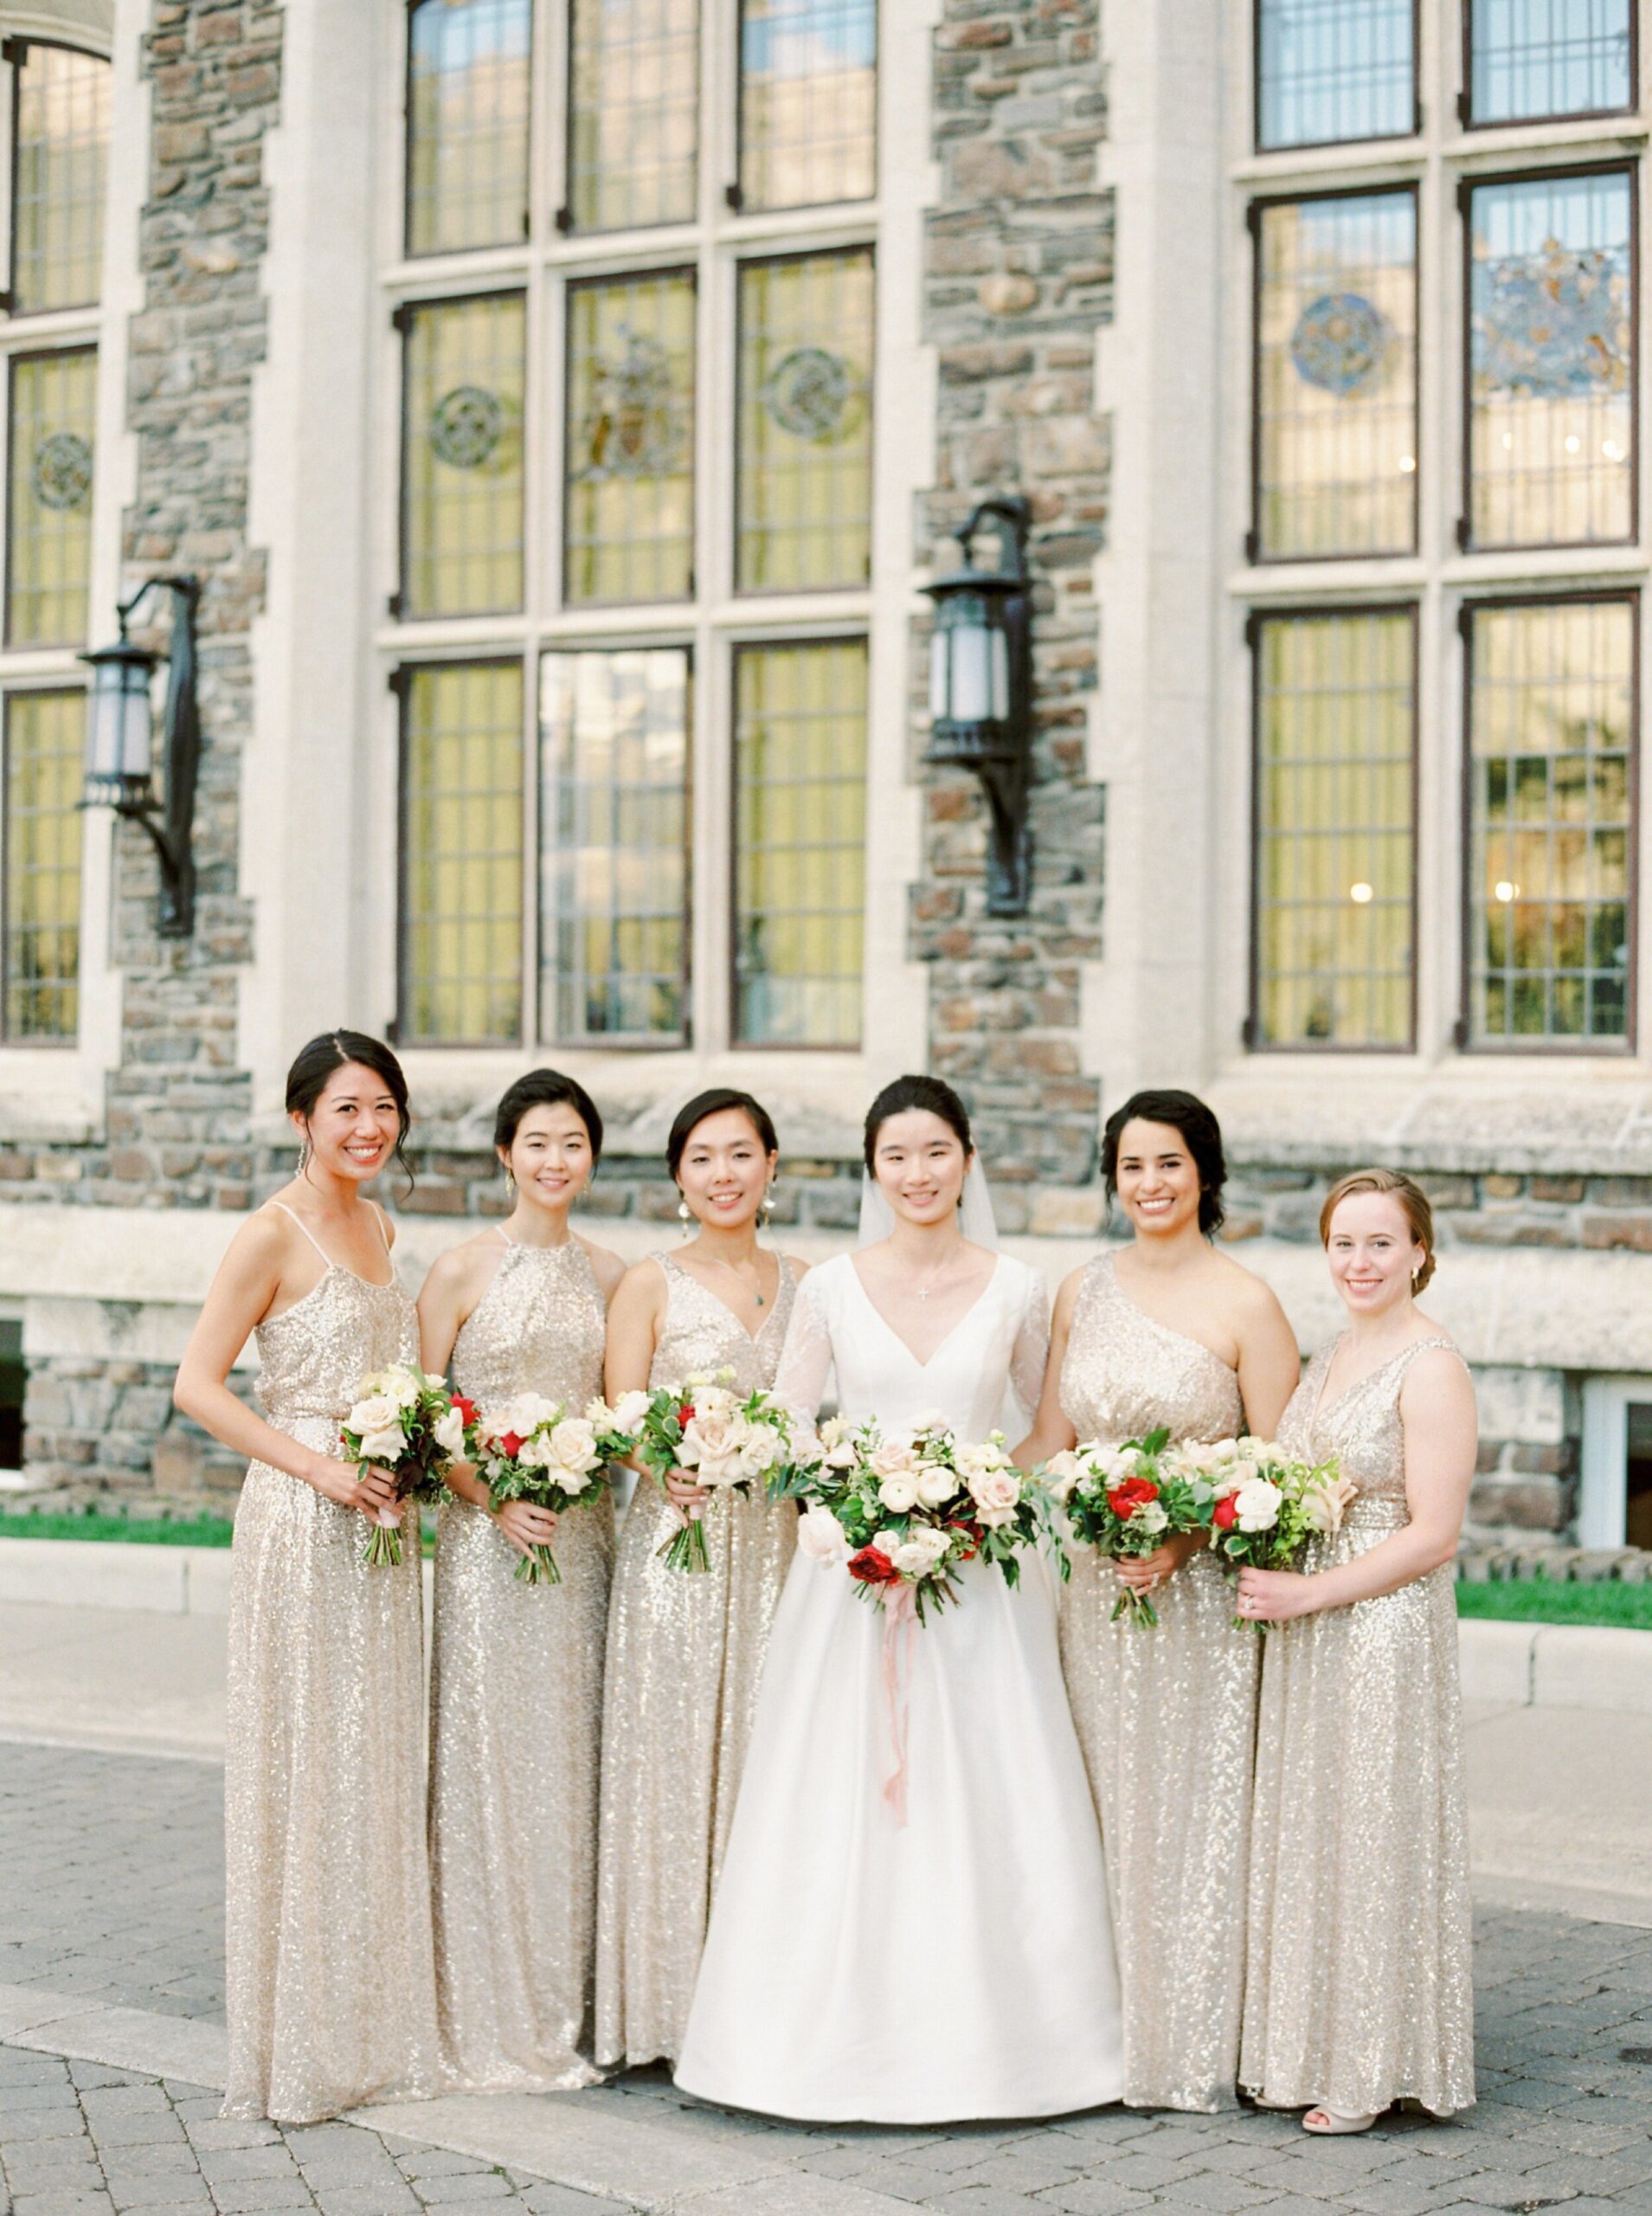  white and red bridal bouquet | gold bridesmaids dress | Fairmont Banff Springs hotel wedding photographers | fine art film photography | portra 400 